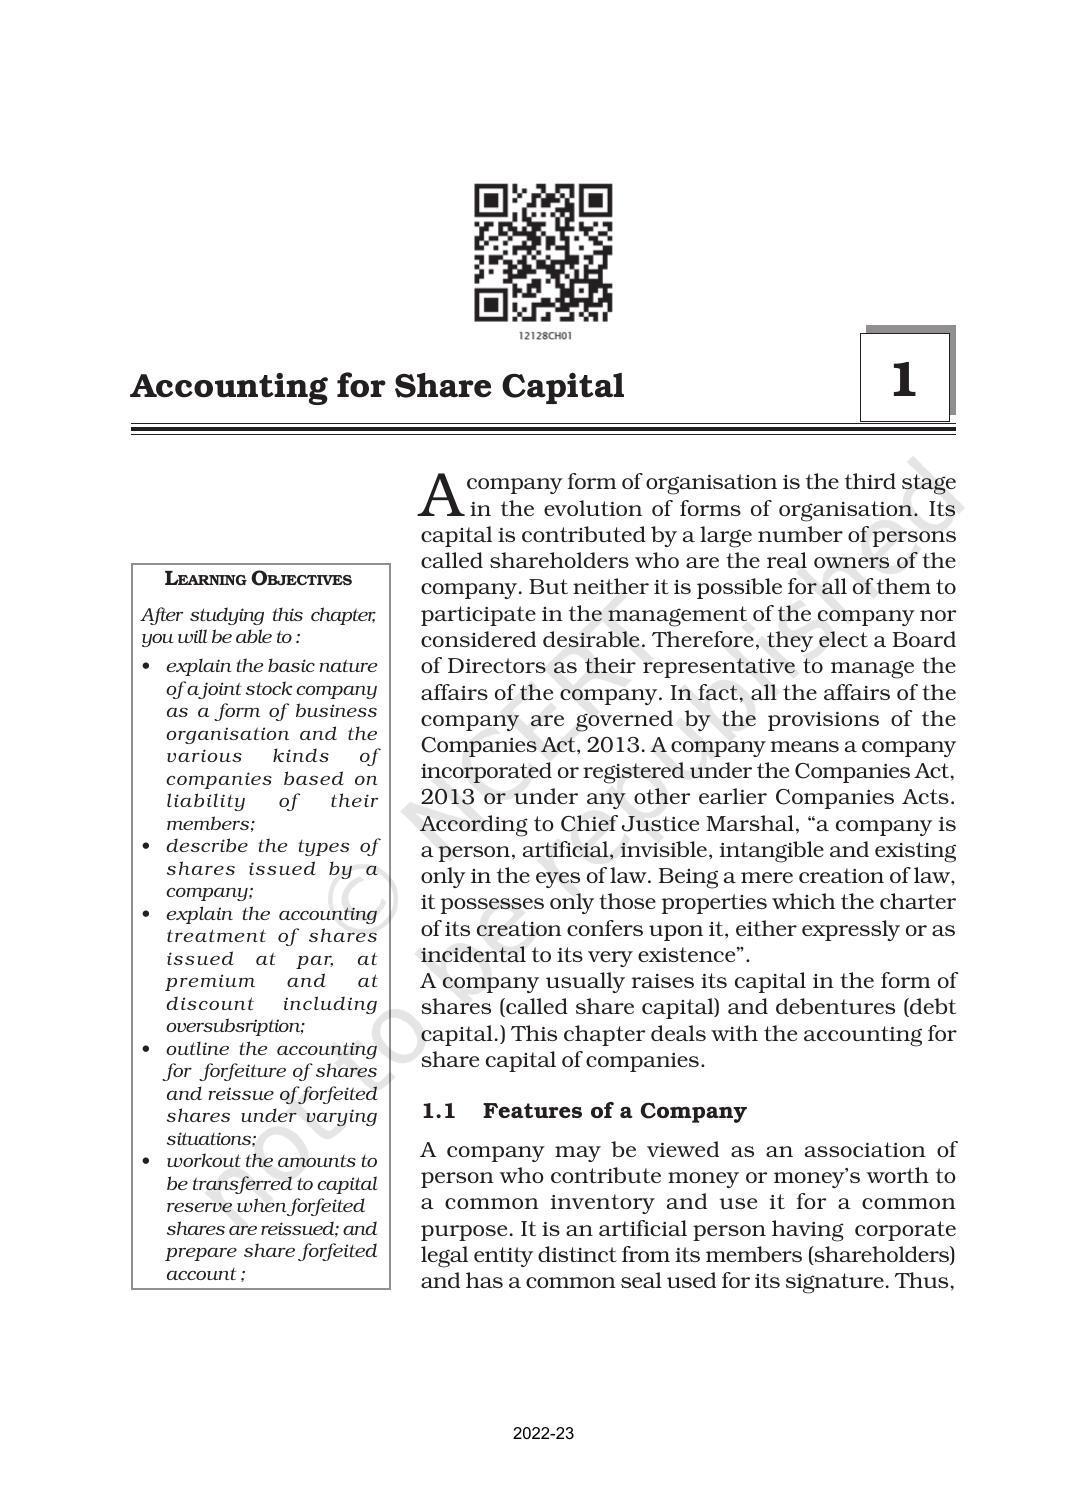 NCERT Book for Class 12 Accountancy Part II Chapter 1 Accounting for Share Capital - Page 1